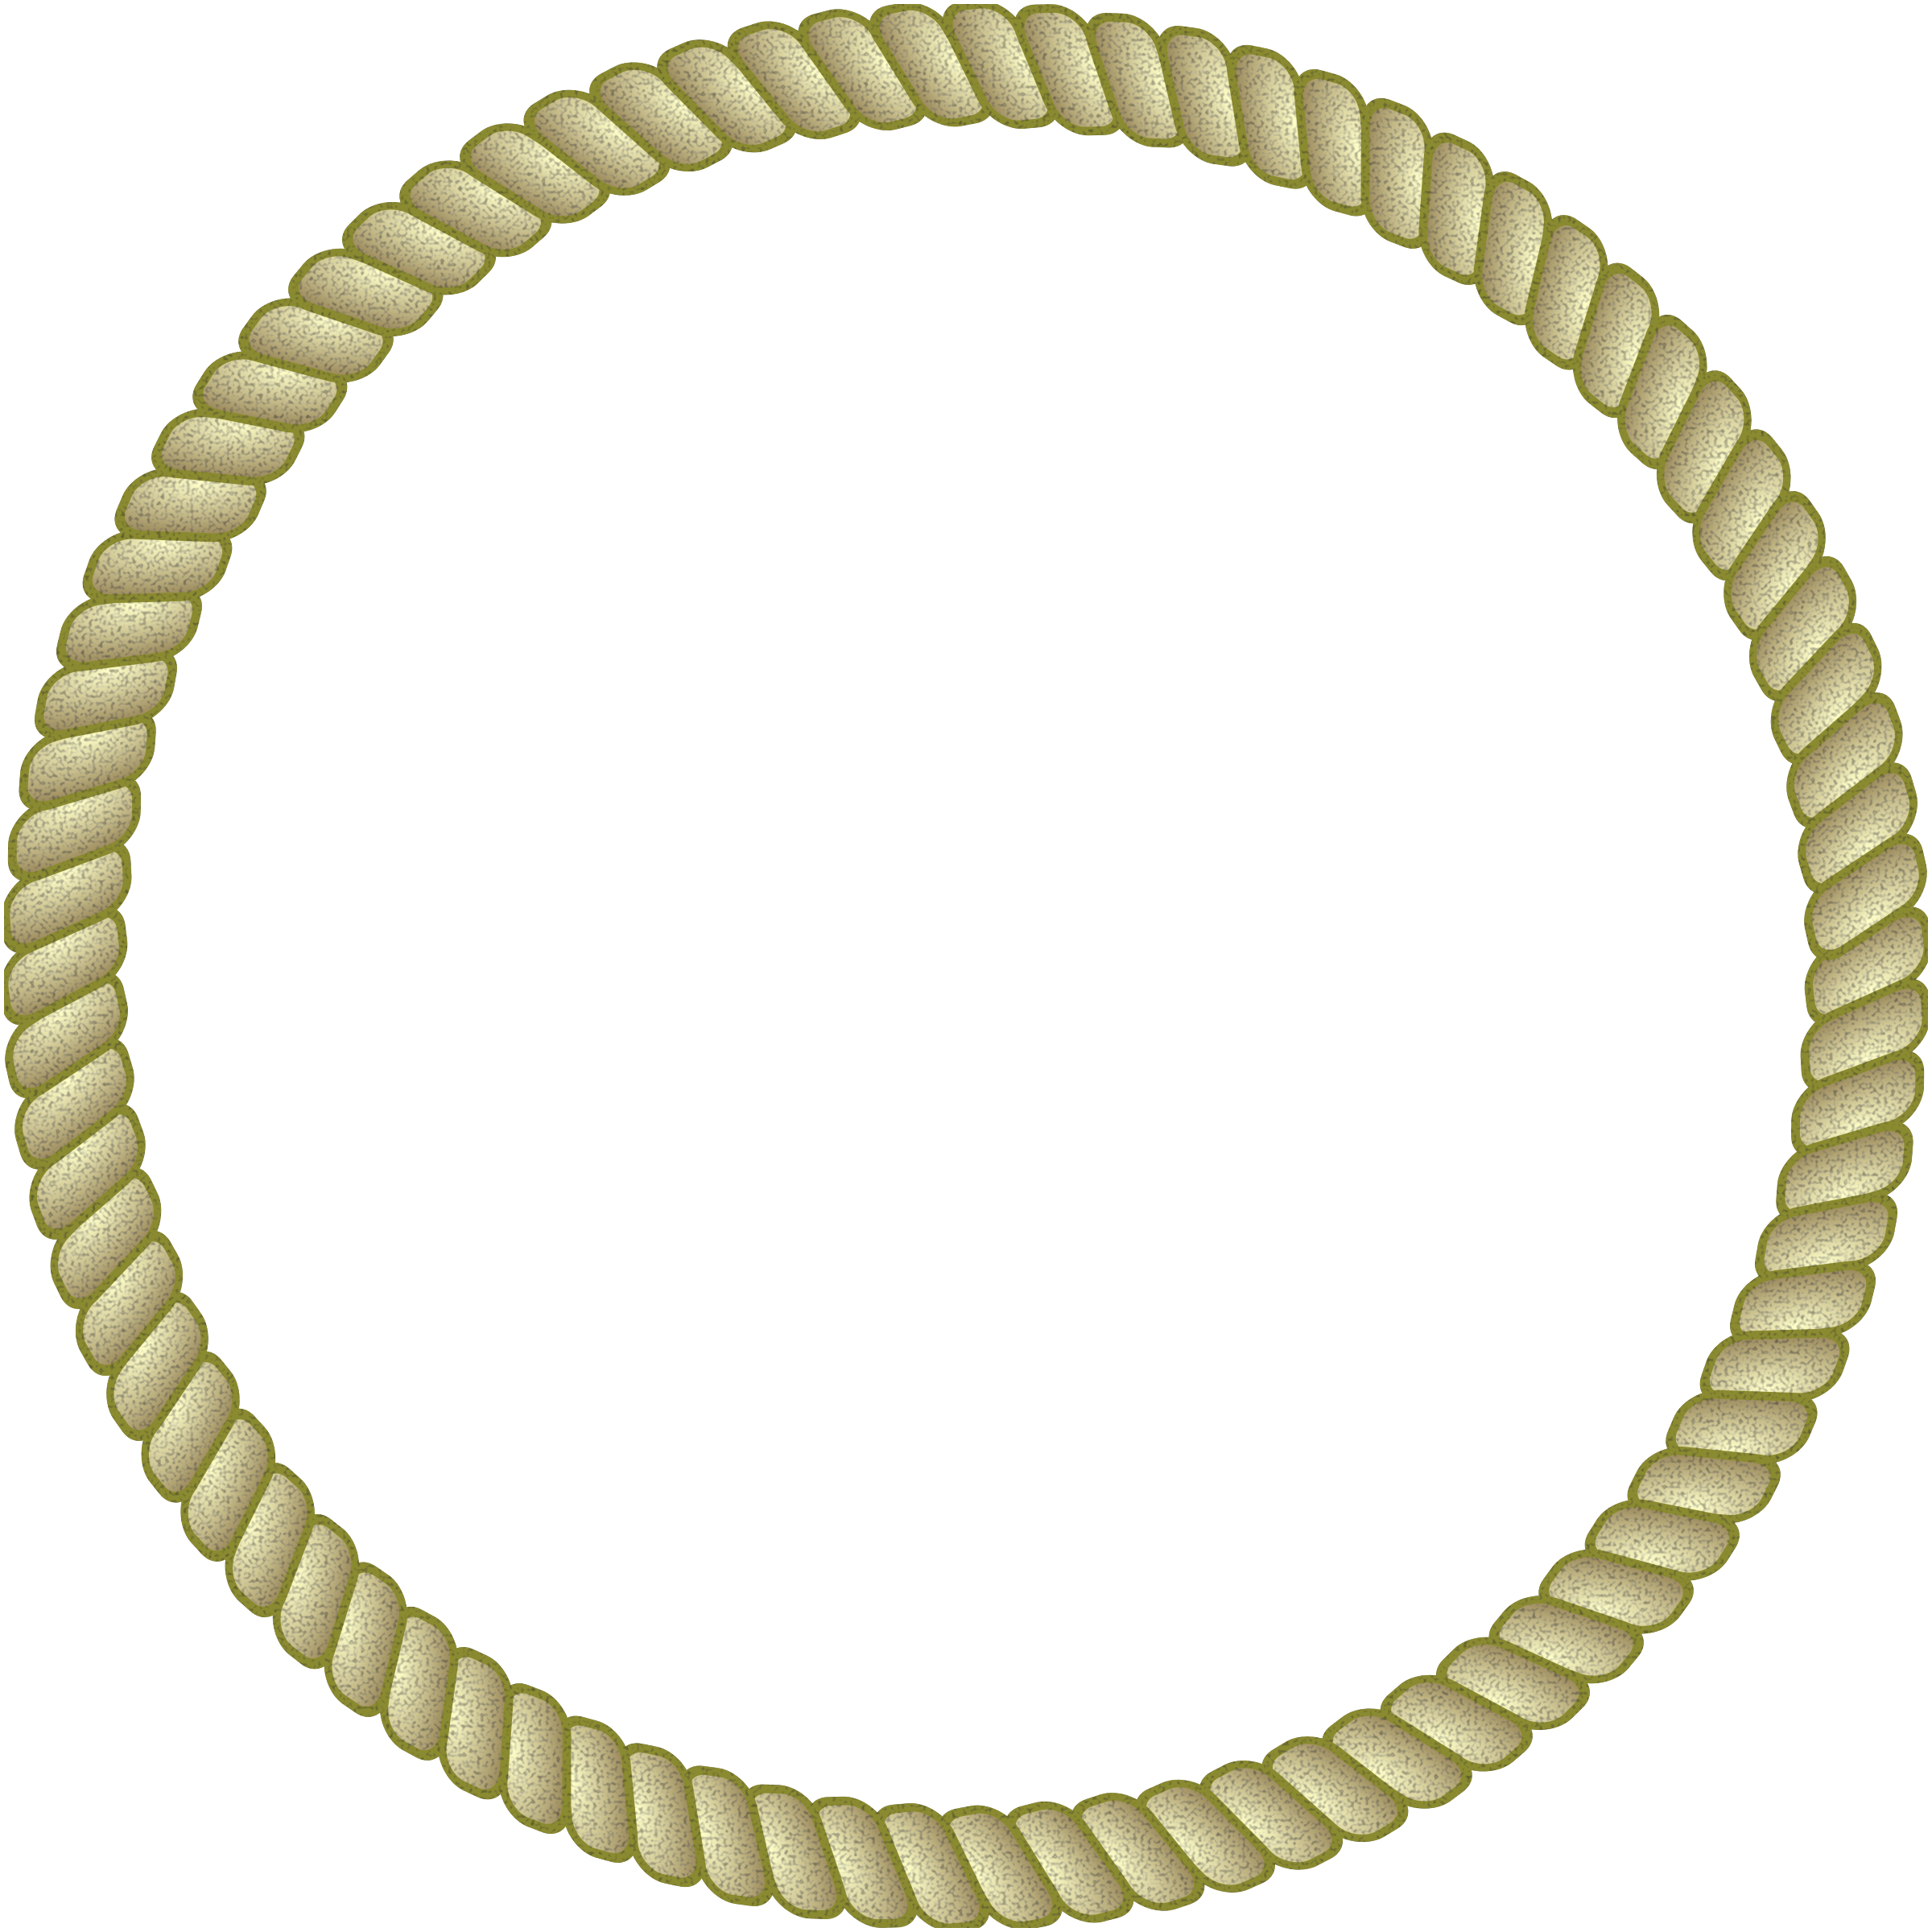 Rope Border Png - ClipArt Best